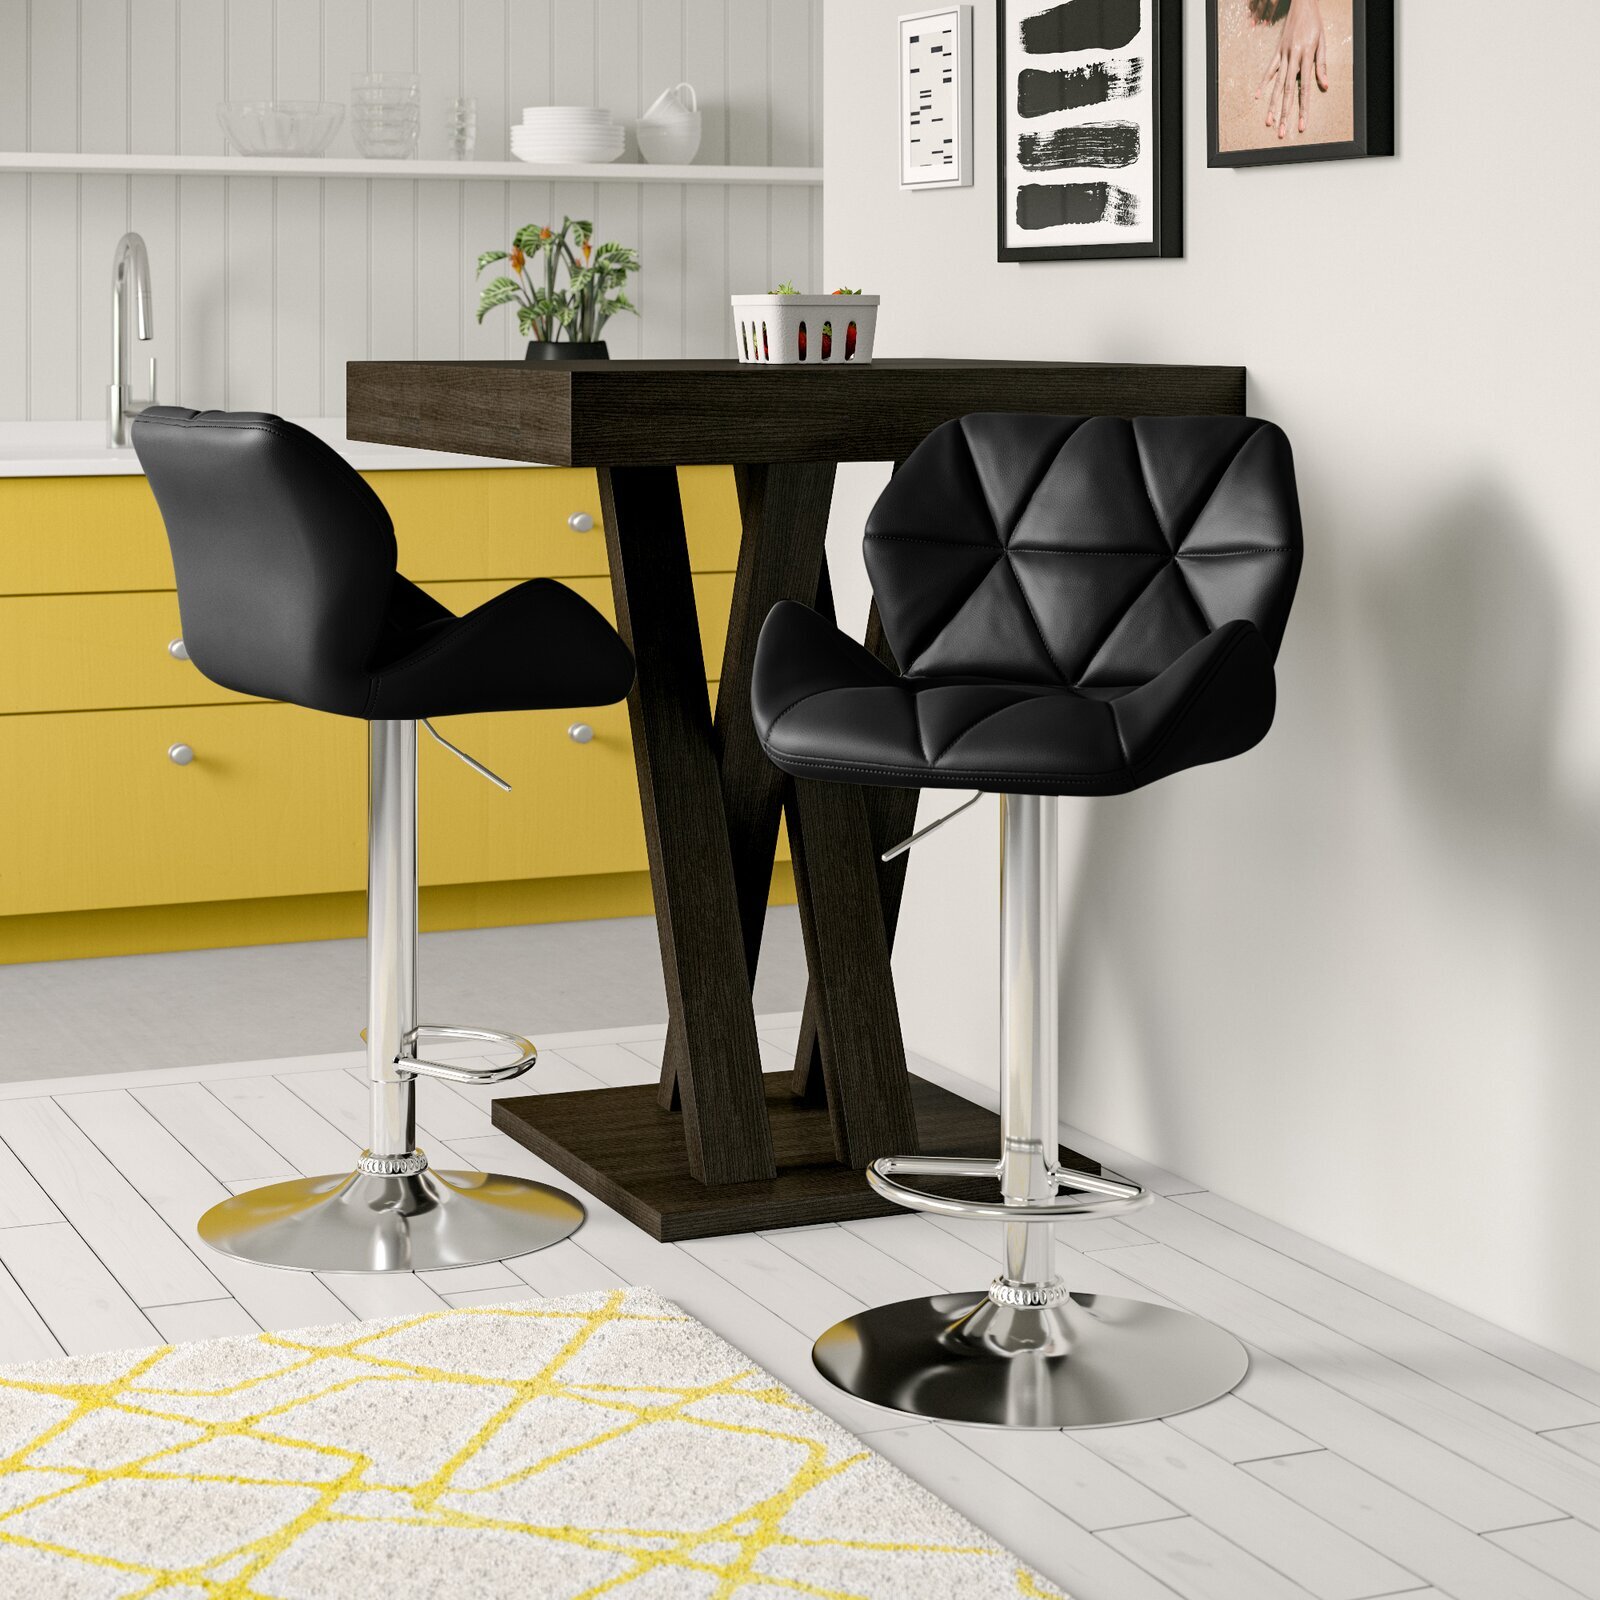 Geometric leather stools with backs and arms